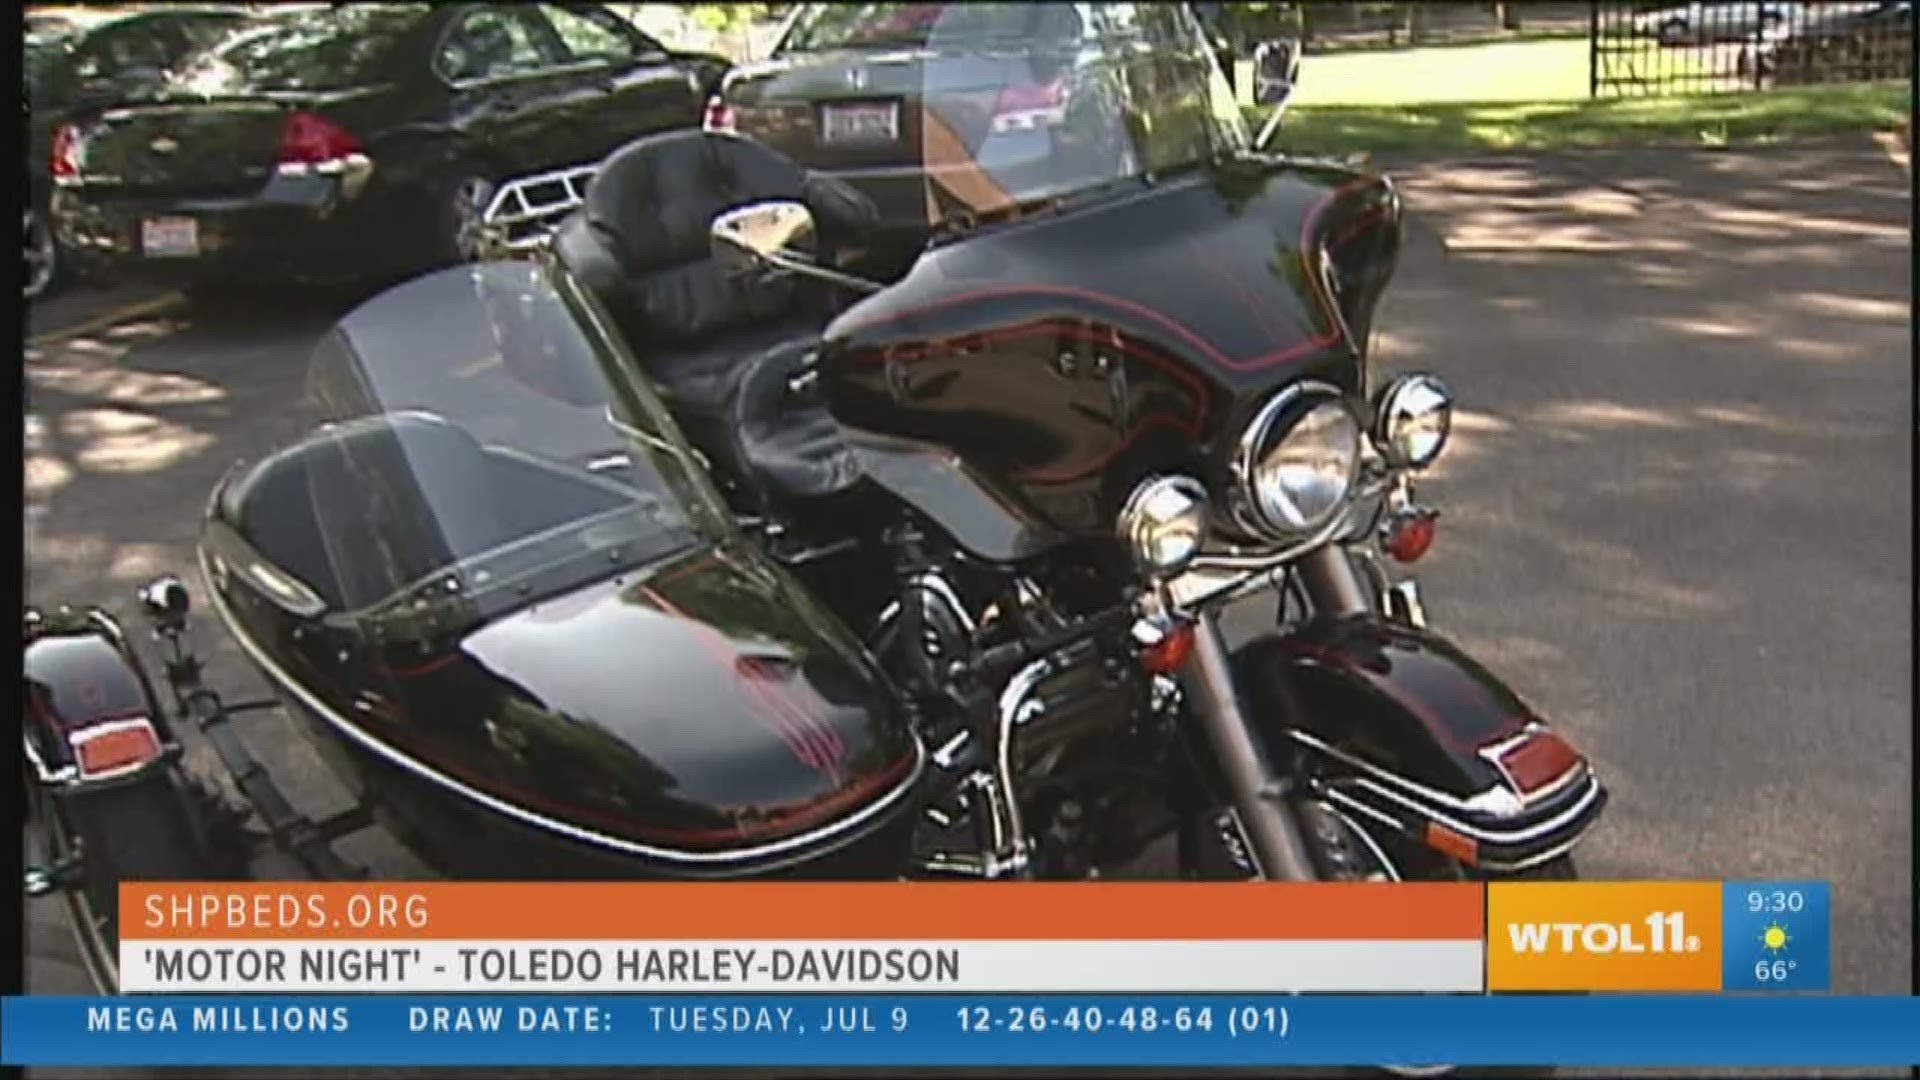 This Thursday, Toledo Harley Davidson and Sleep in Heavenly Peace invite you to Motor Night!